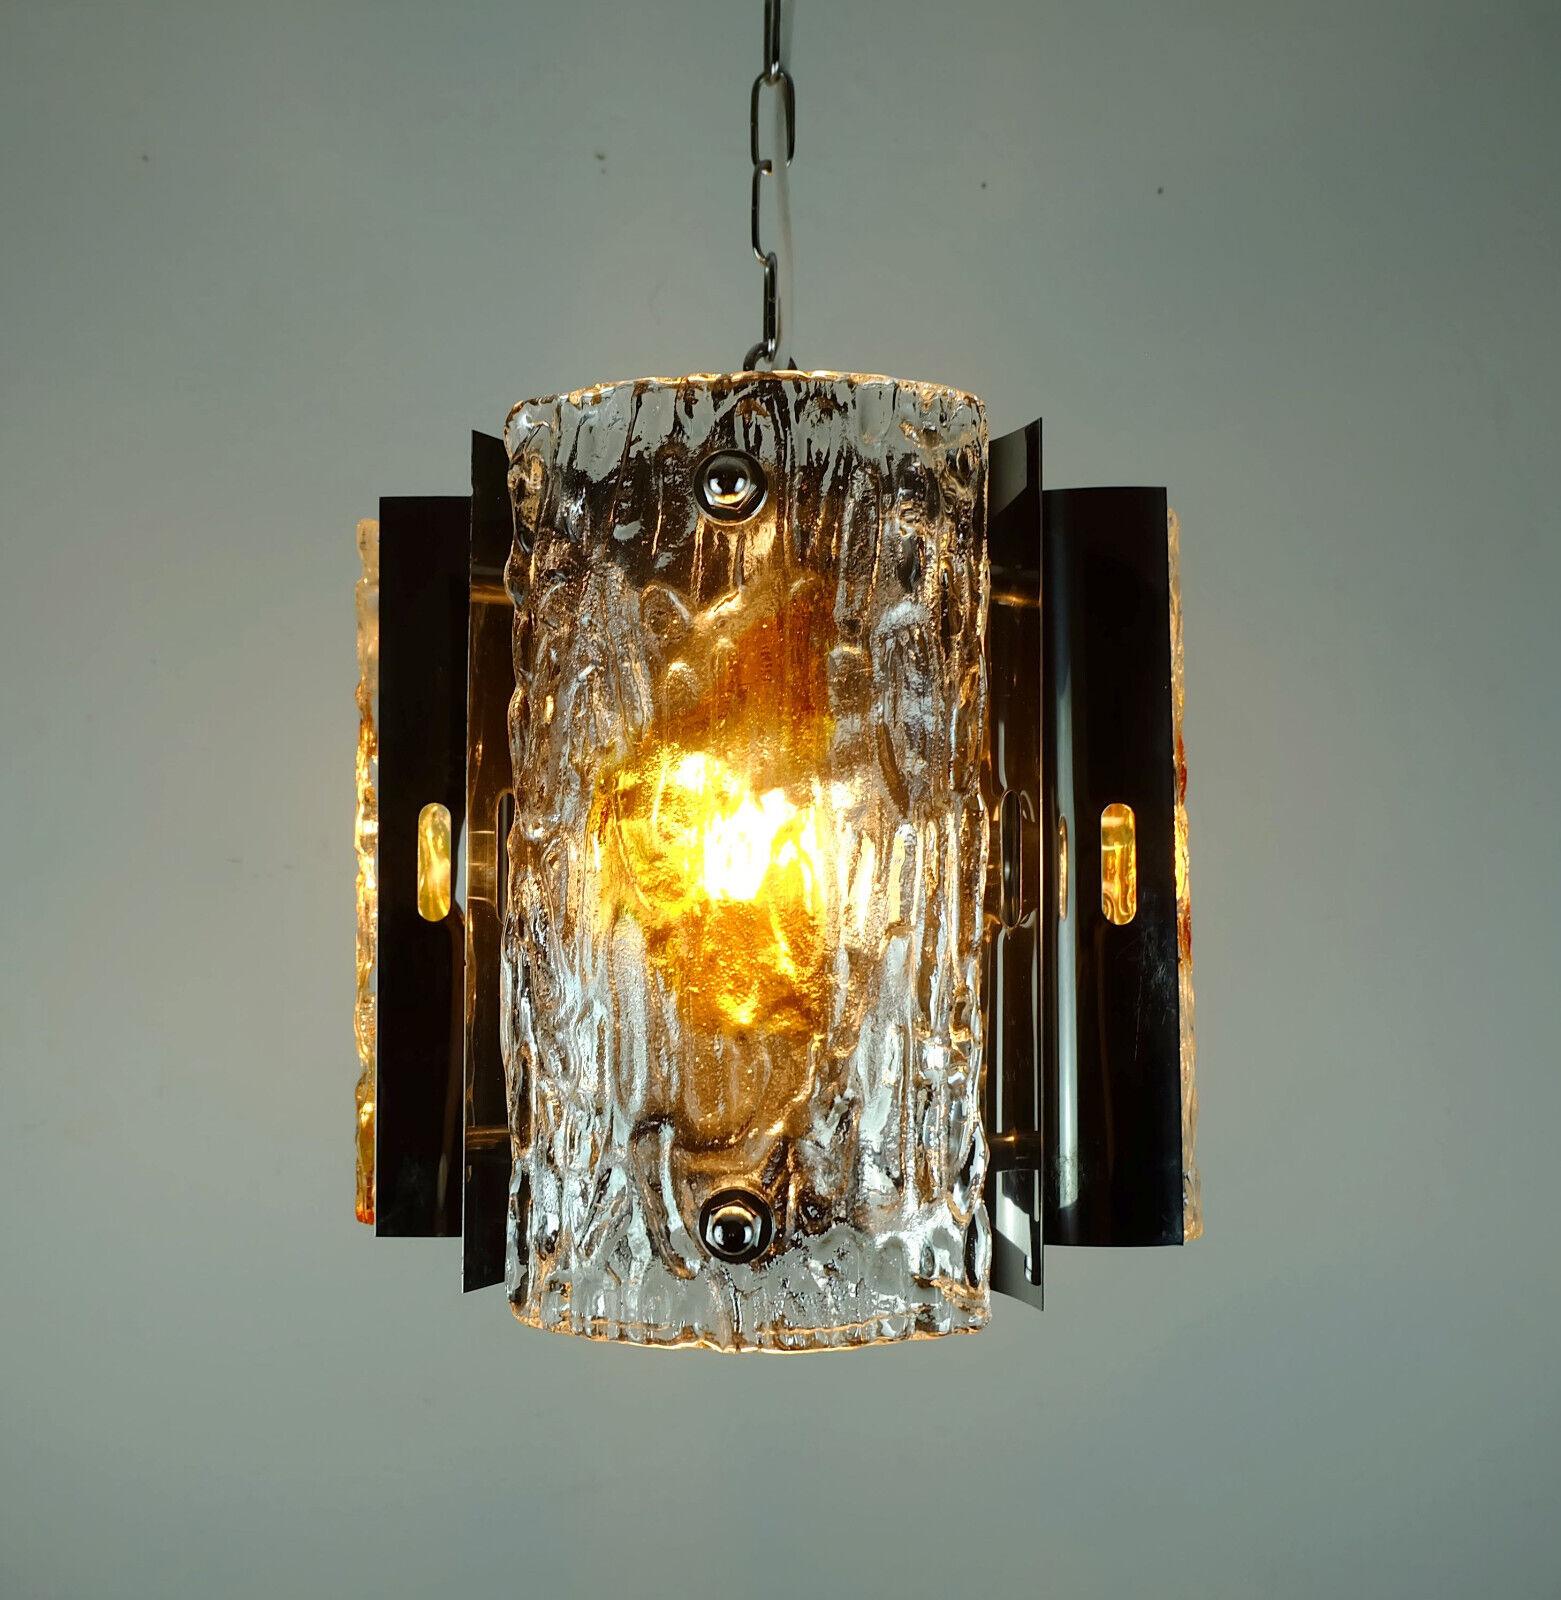 A very beautiful 1960s to 70s midcentury pendant. No label, most probably made by Mazzega, Italy. Made of chromed metal and 3 curved square disc made of thick transparent ice glass with amber color inclusions. Holds 3 E14 bulbs. The bulbs shown in